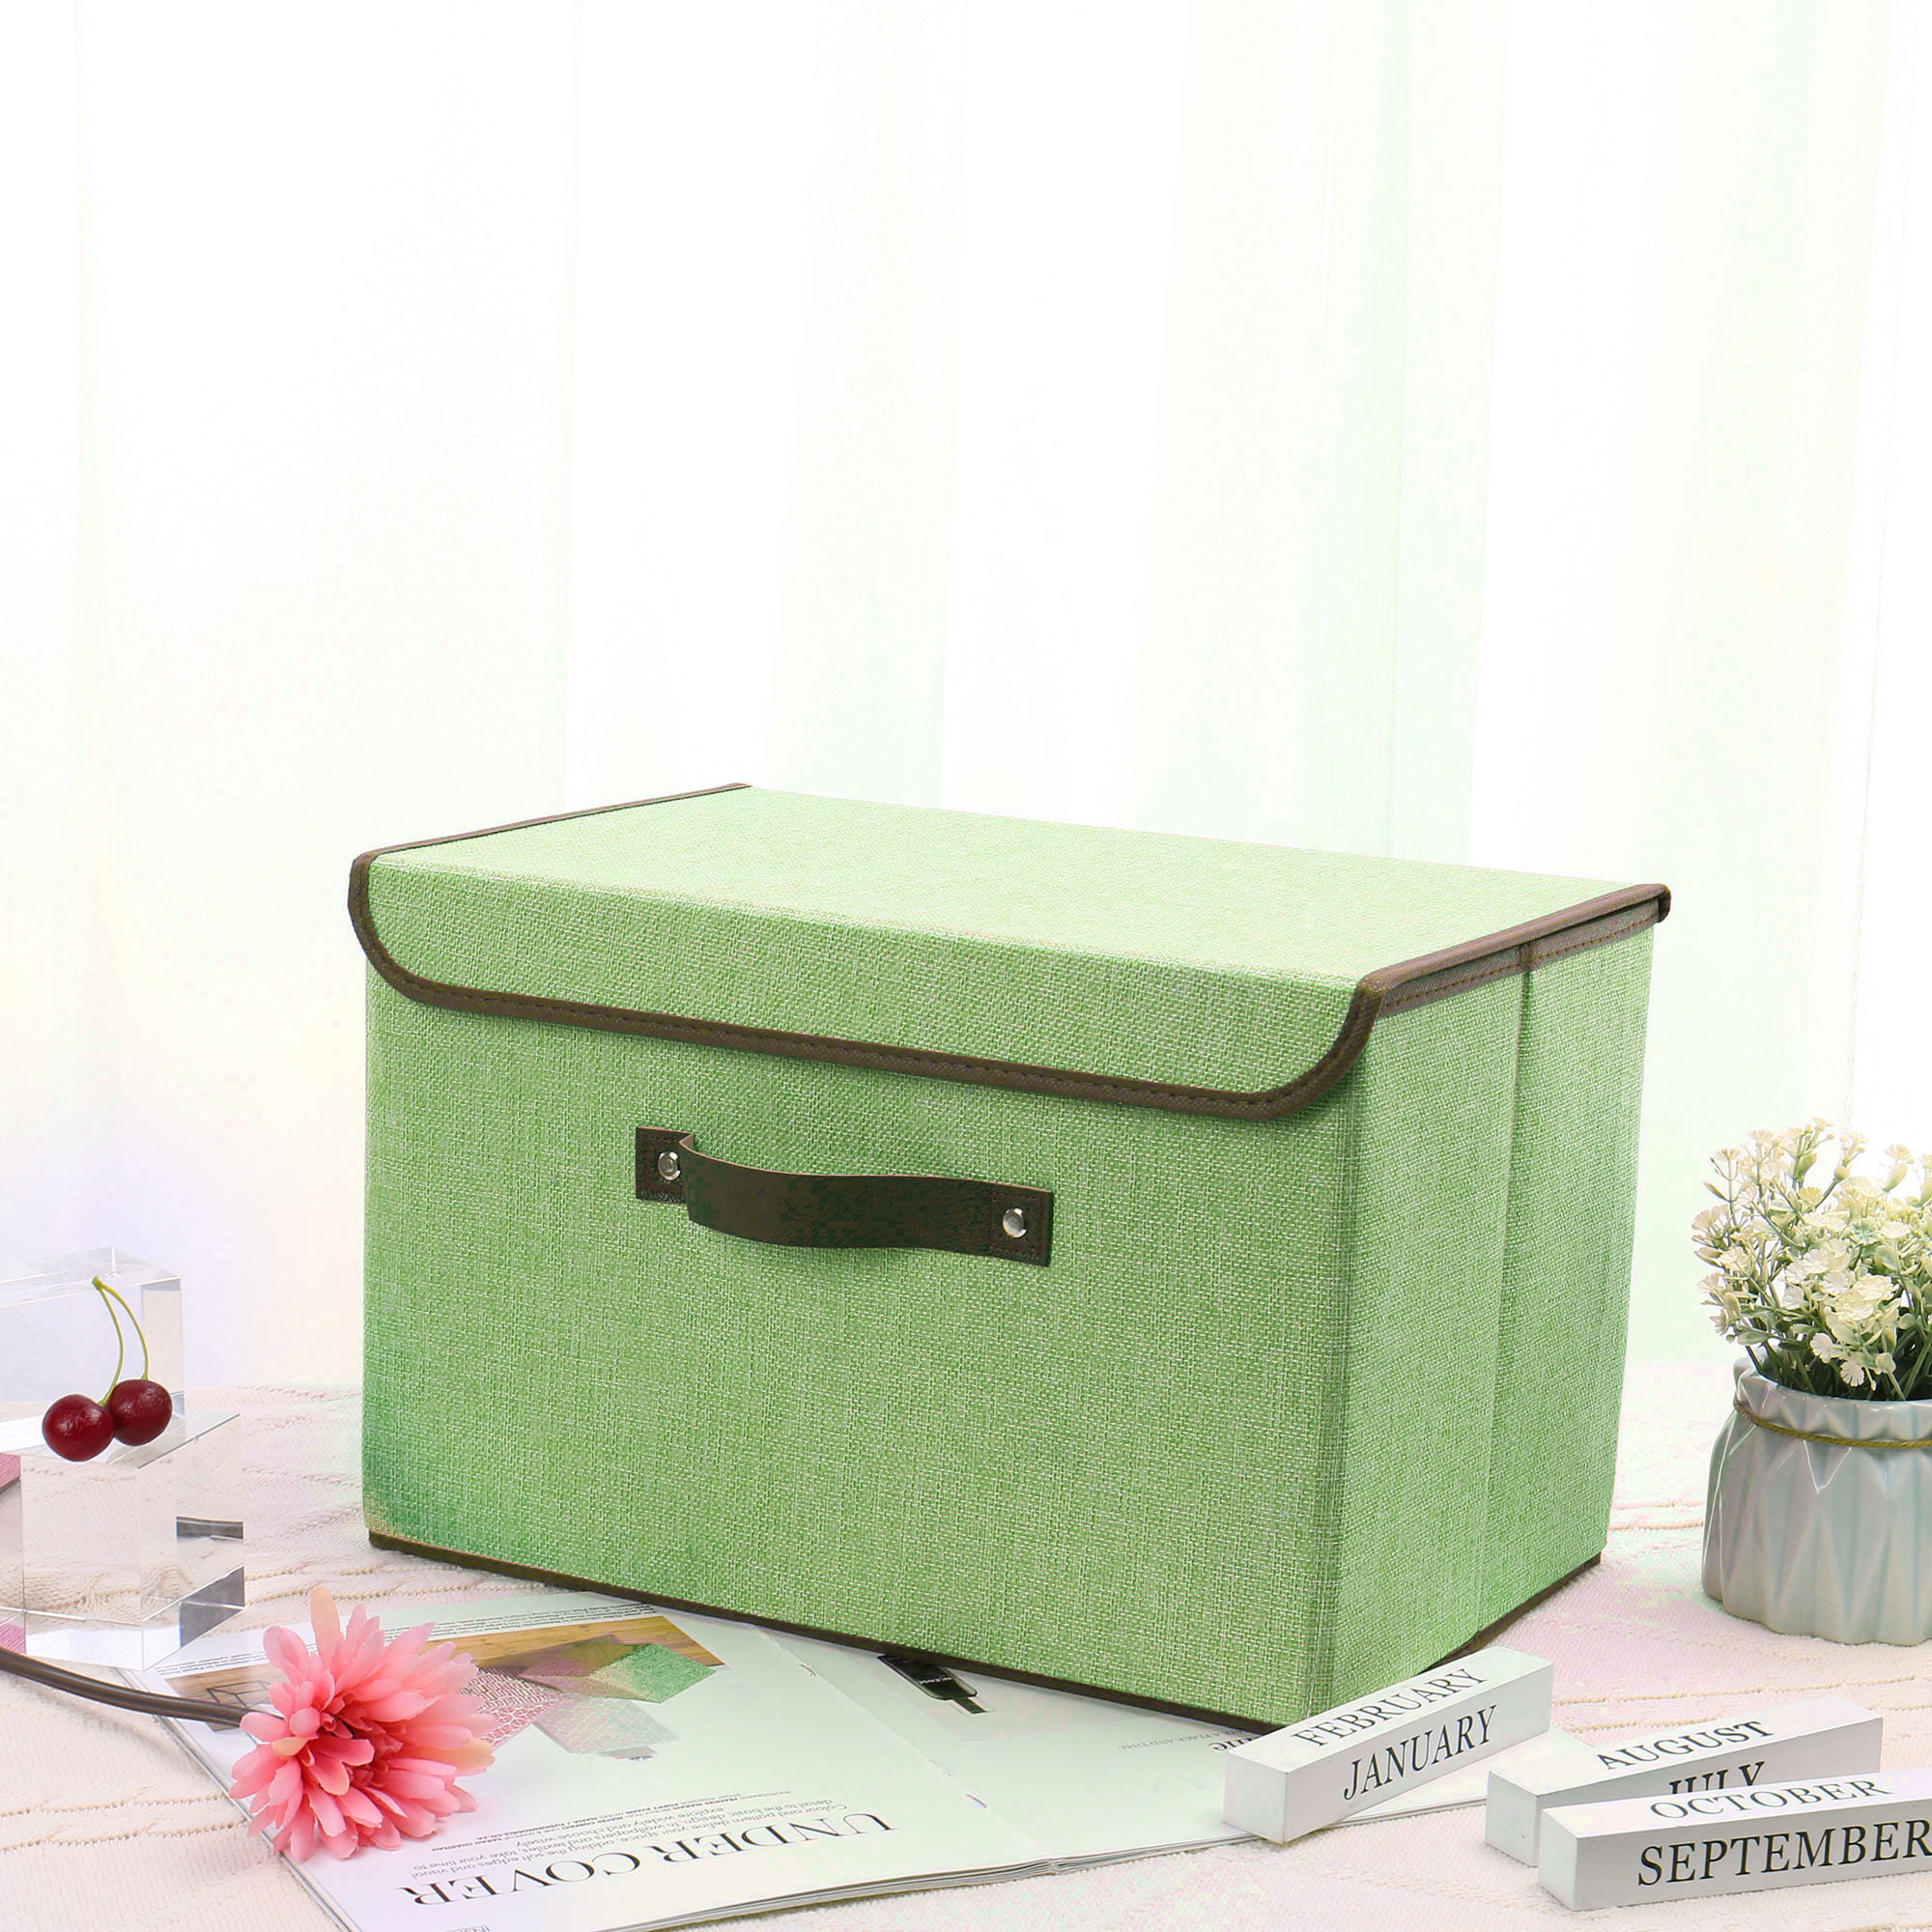 Details about   Foldable Storage Collapsible Folding Box Fabric Cube Room Basket Organizer Case 